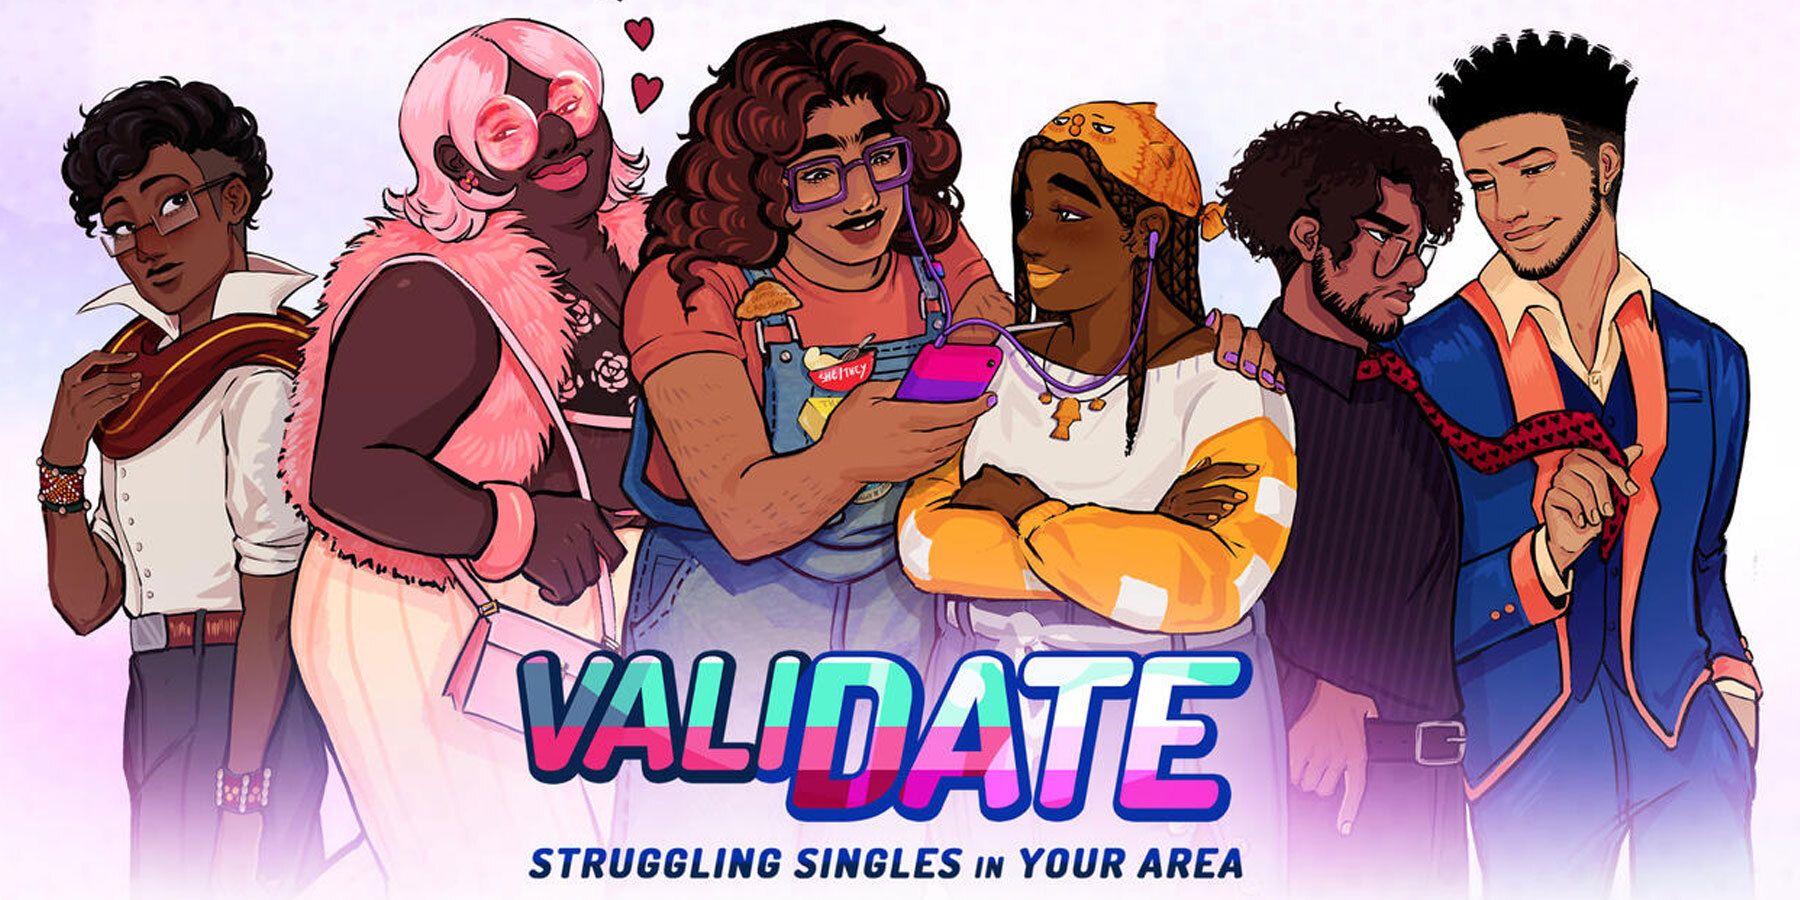 ValiDate-Struggling-Singles-in-your-Area-visual-novel-updated-singles